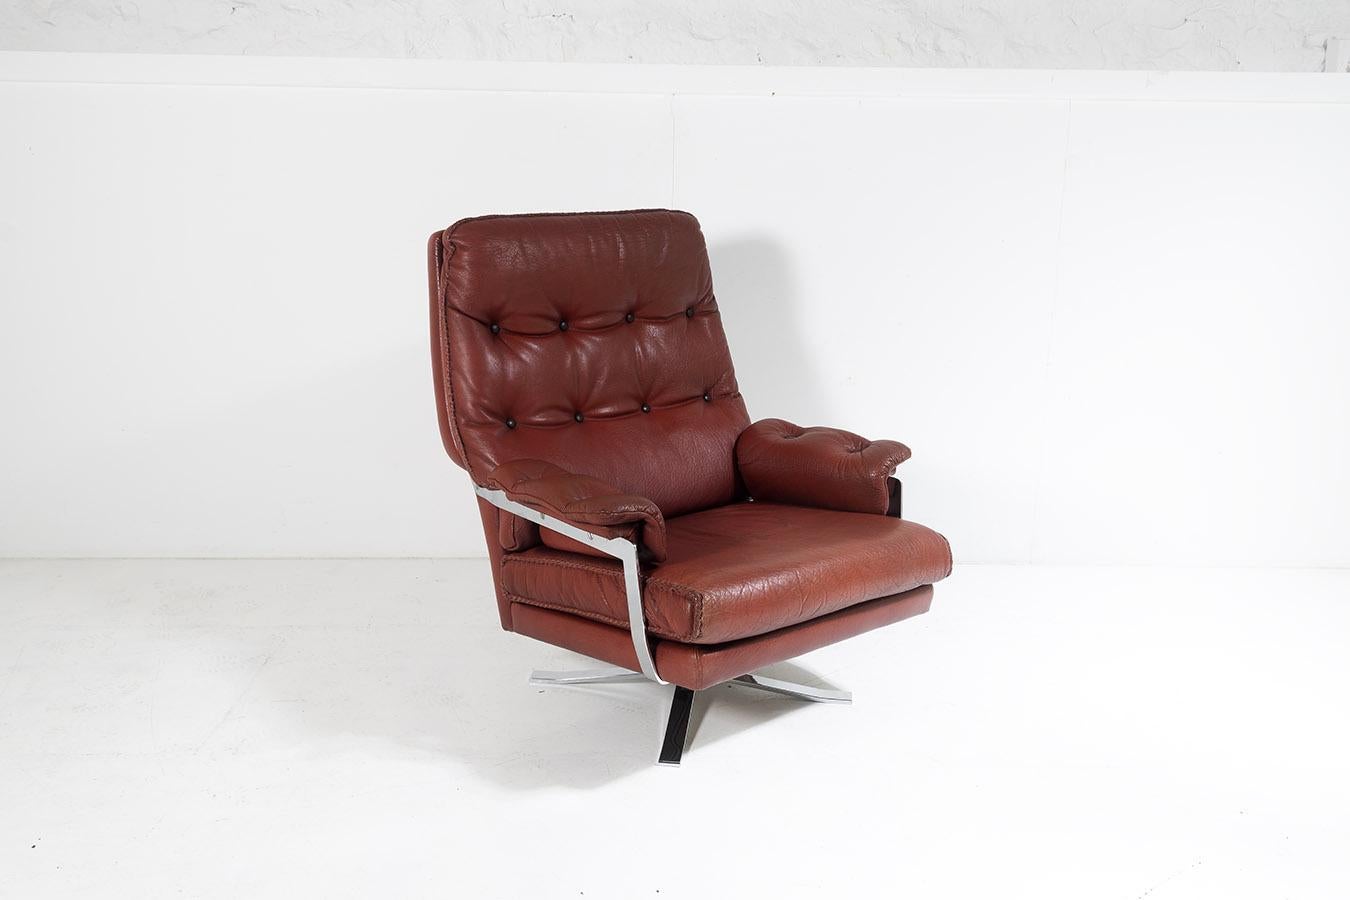 Mid-Century Modern 1960s Mid Centry Burnt Orange Brown Leather Swivel Chair in style of Arne Norell For Sale